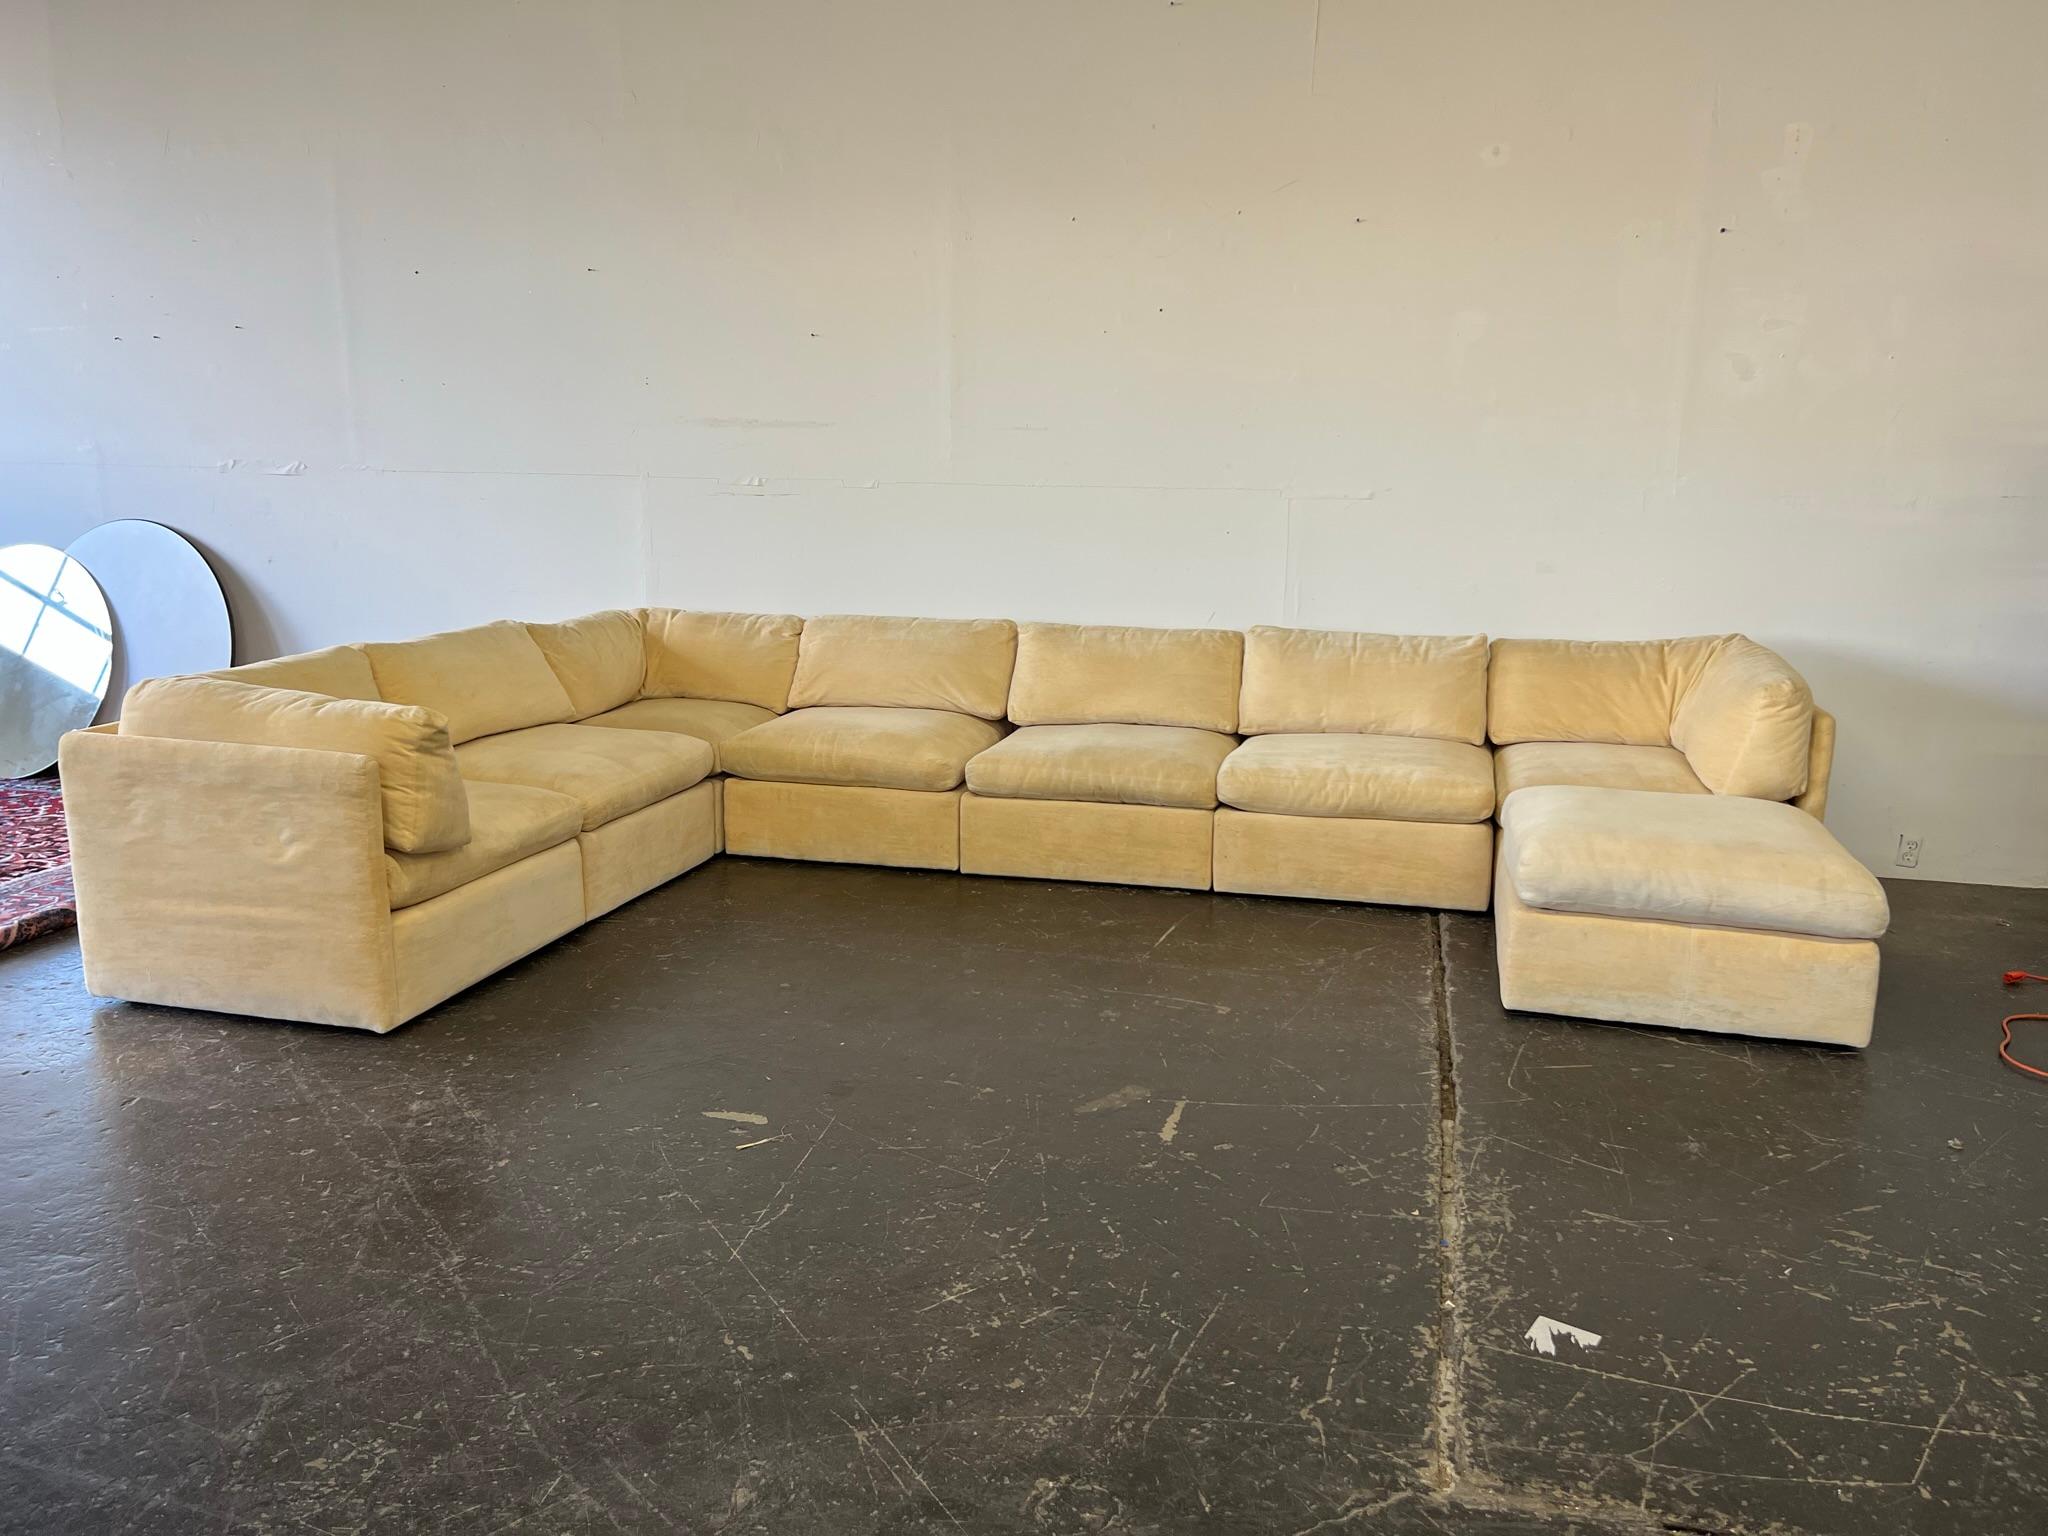 Iconic Milo Baughman for Thayer Coggin 8-piece sectional sofa with ottoman. 3 corner pieces, 4 center pieces, and ottoman. Very good vintage condition - the beige velvet upholstery shows only light wear as shown in photos. Original tags included.